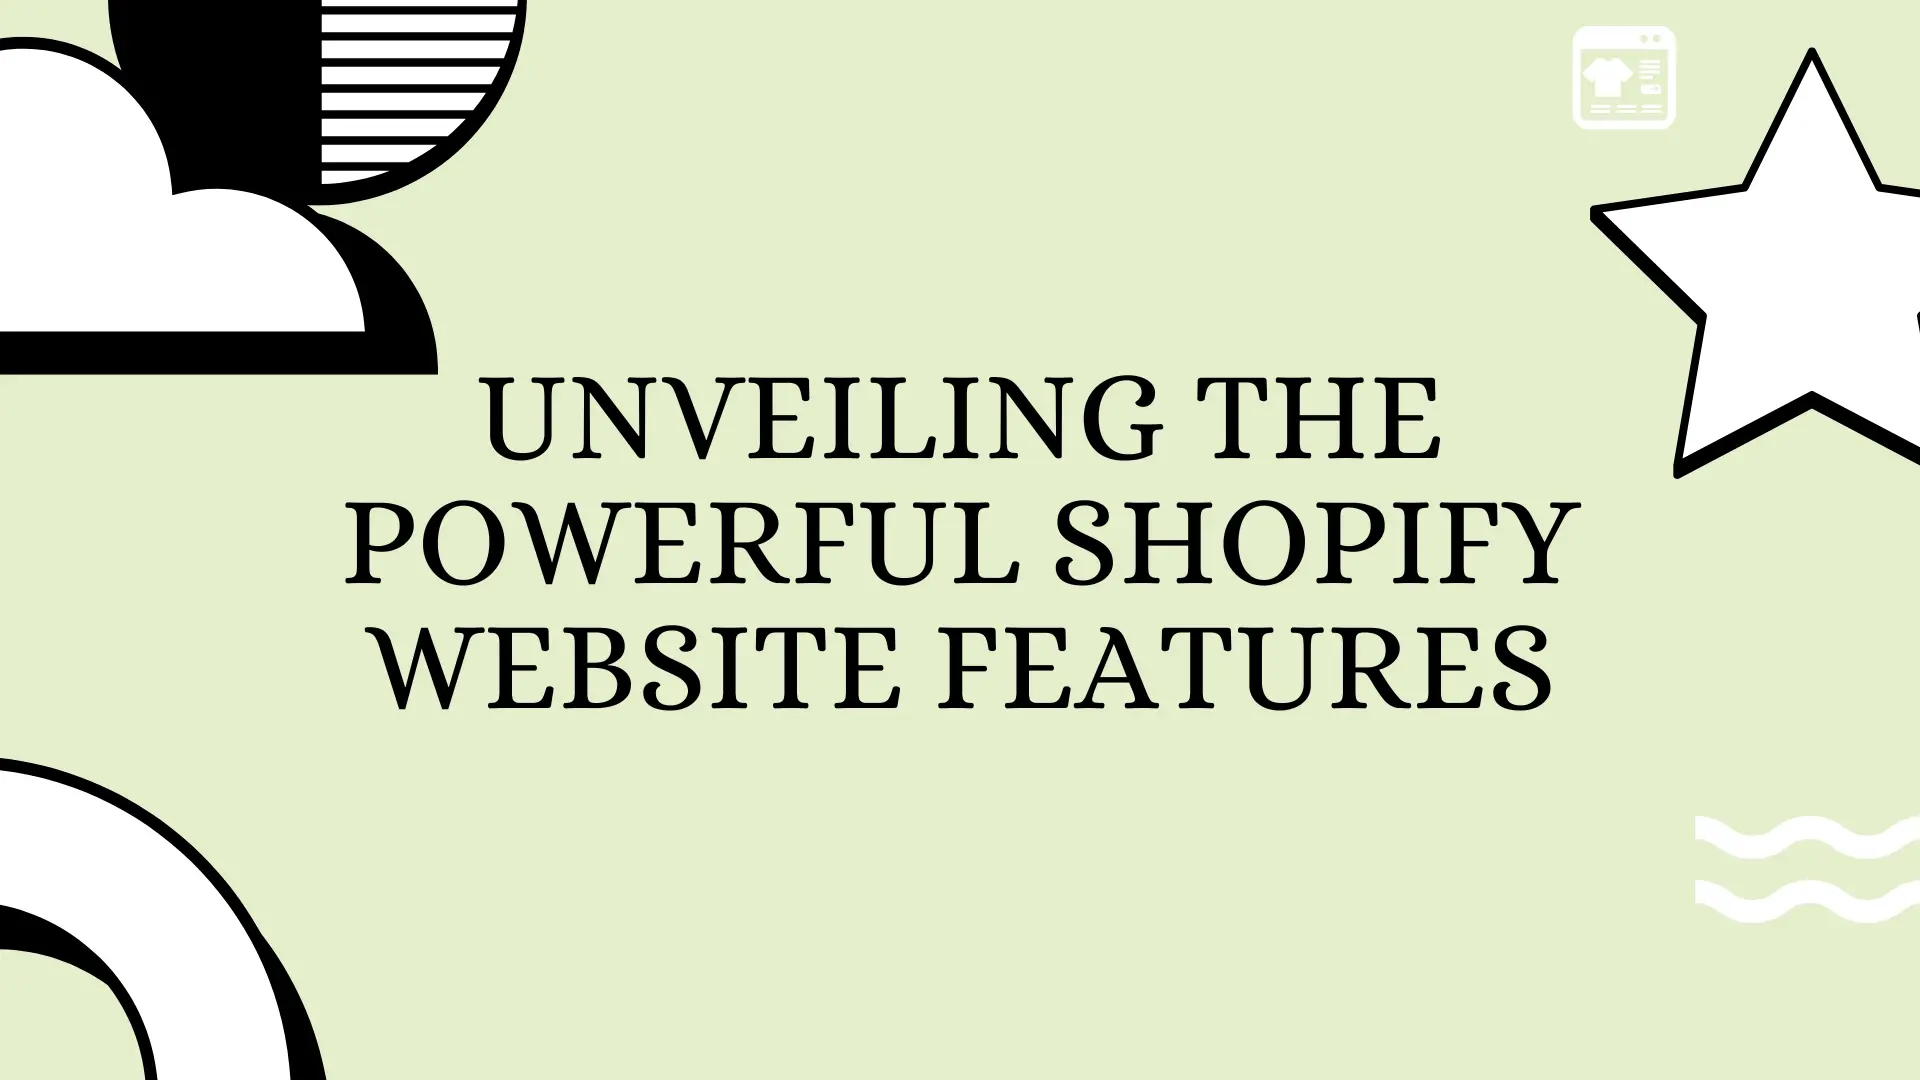 Unveiling the Powerful Shopify Website Features